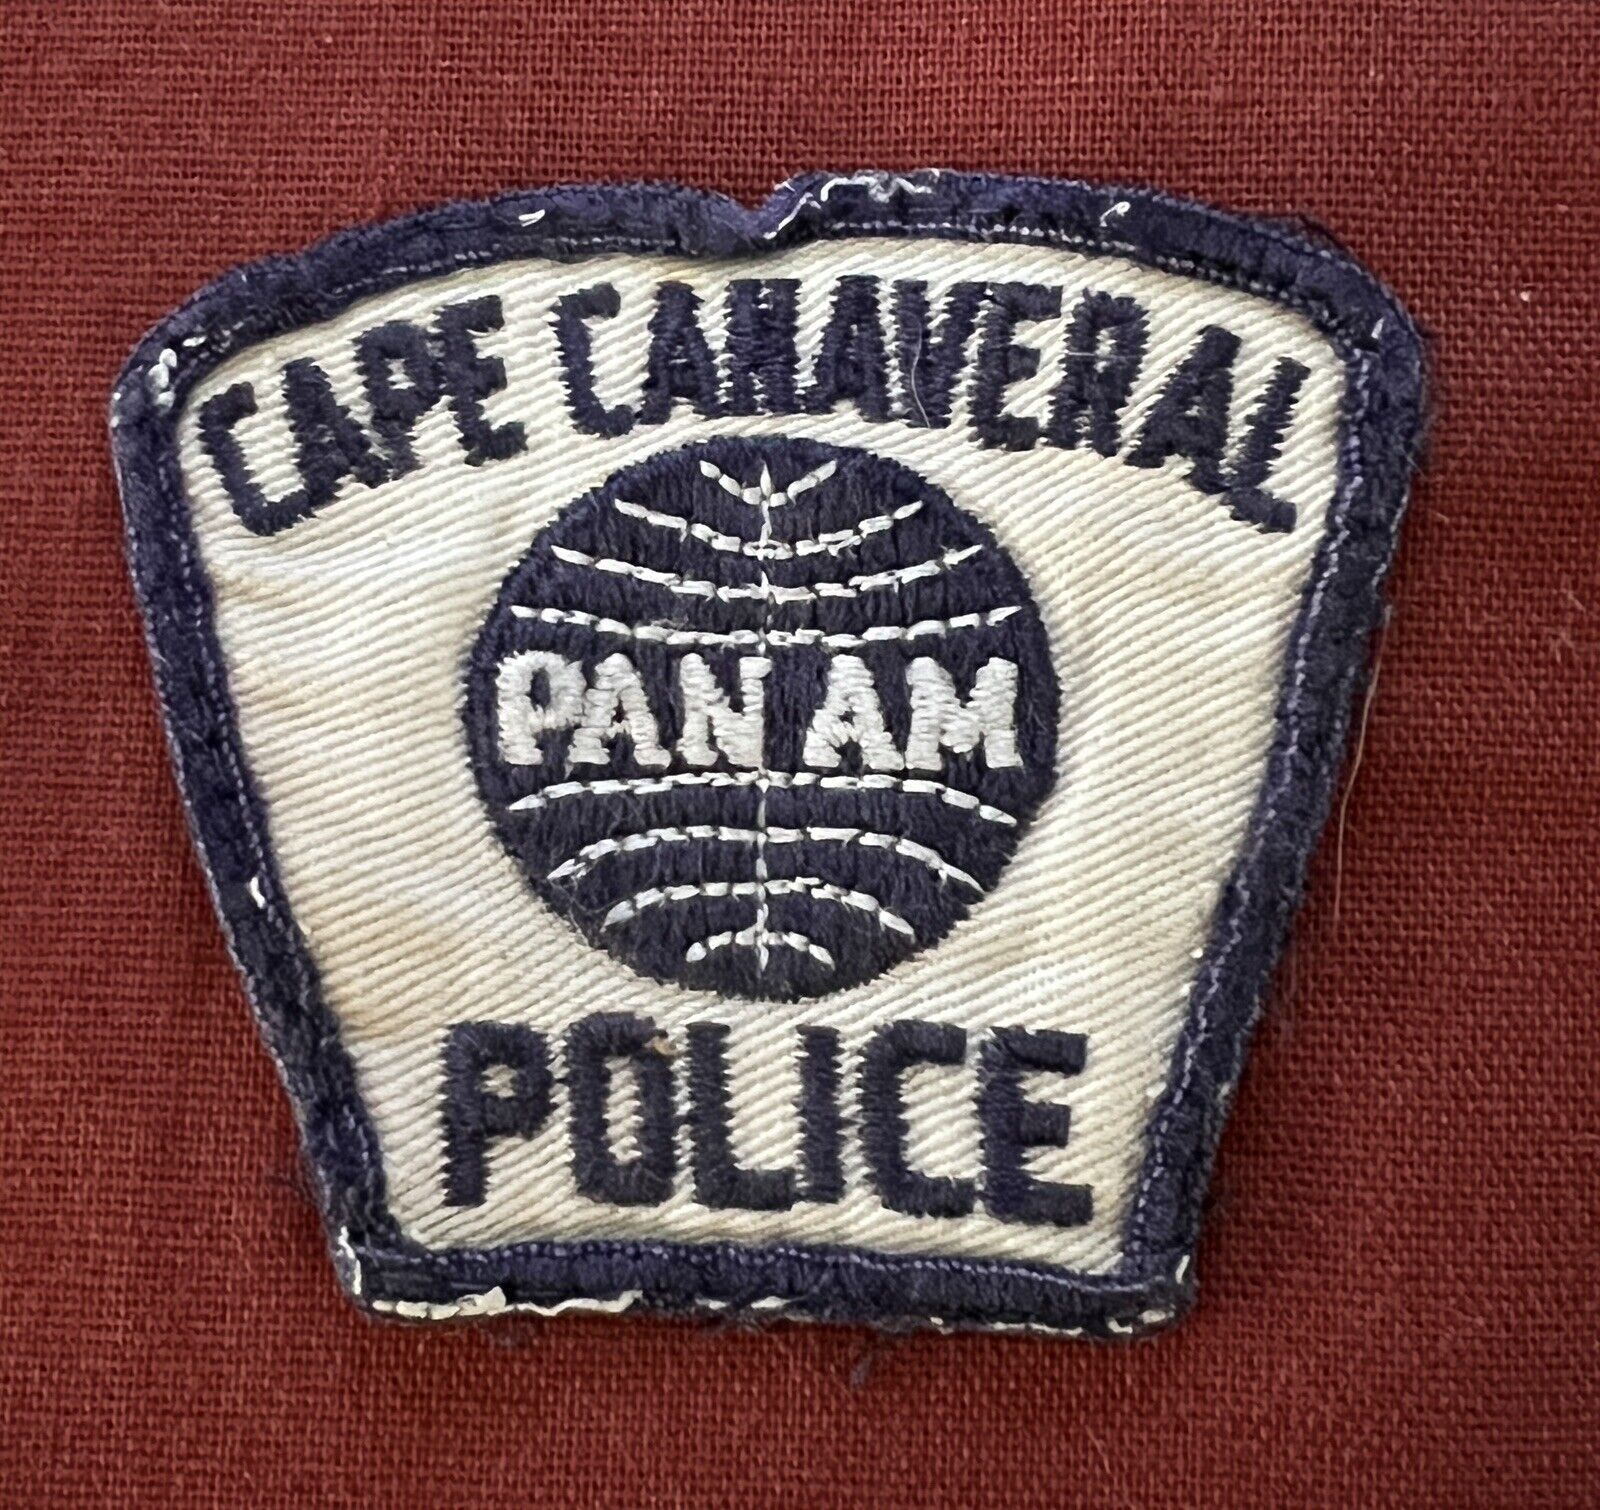 Vintage Cape Canaveral Base Florida Police Patch NASA 1960s Pan Am PAA Airline